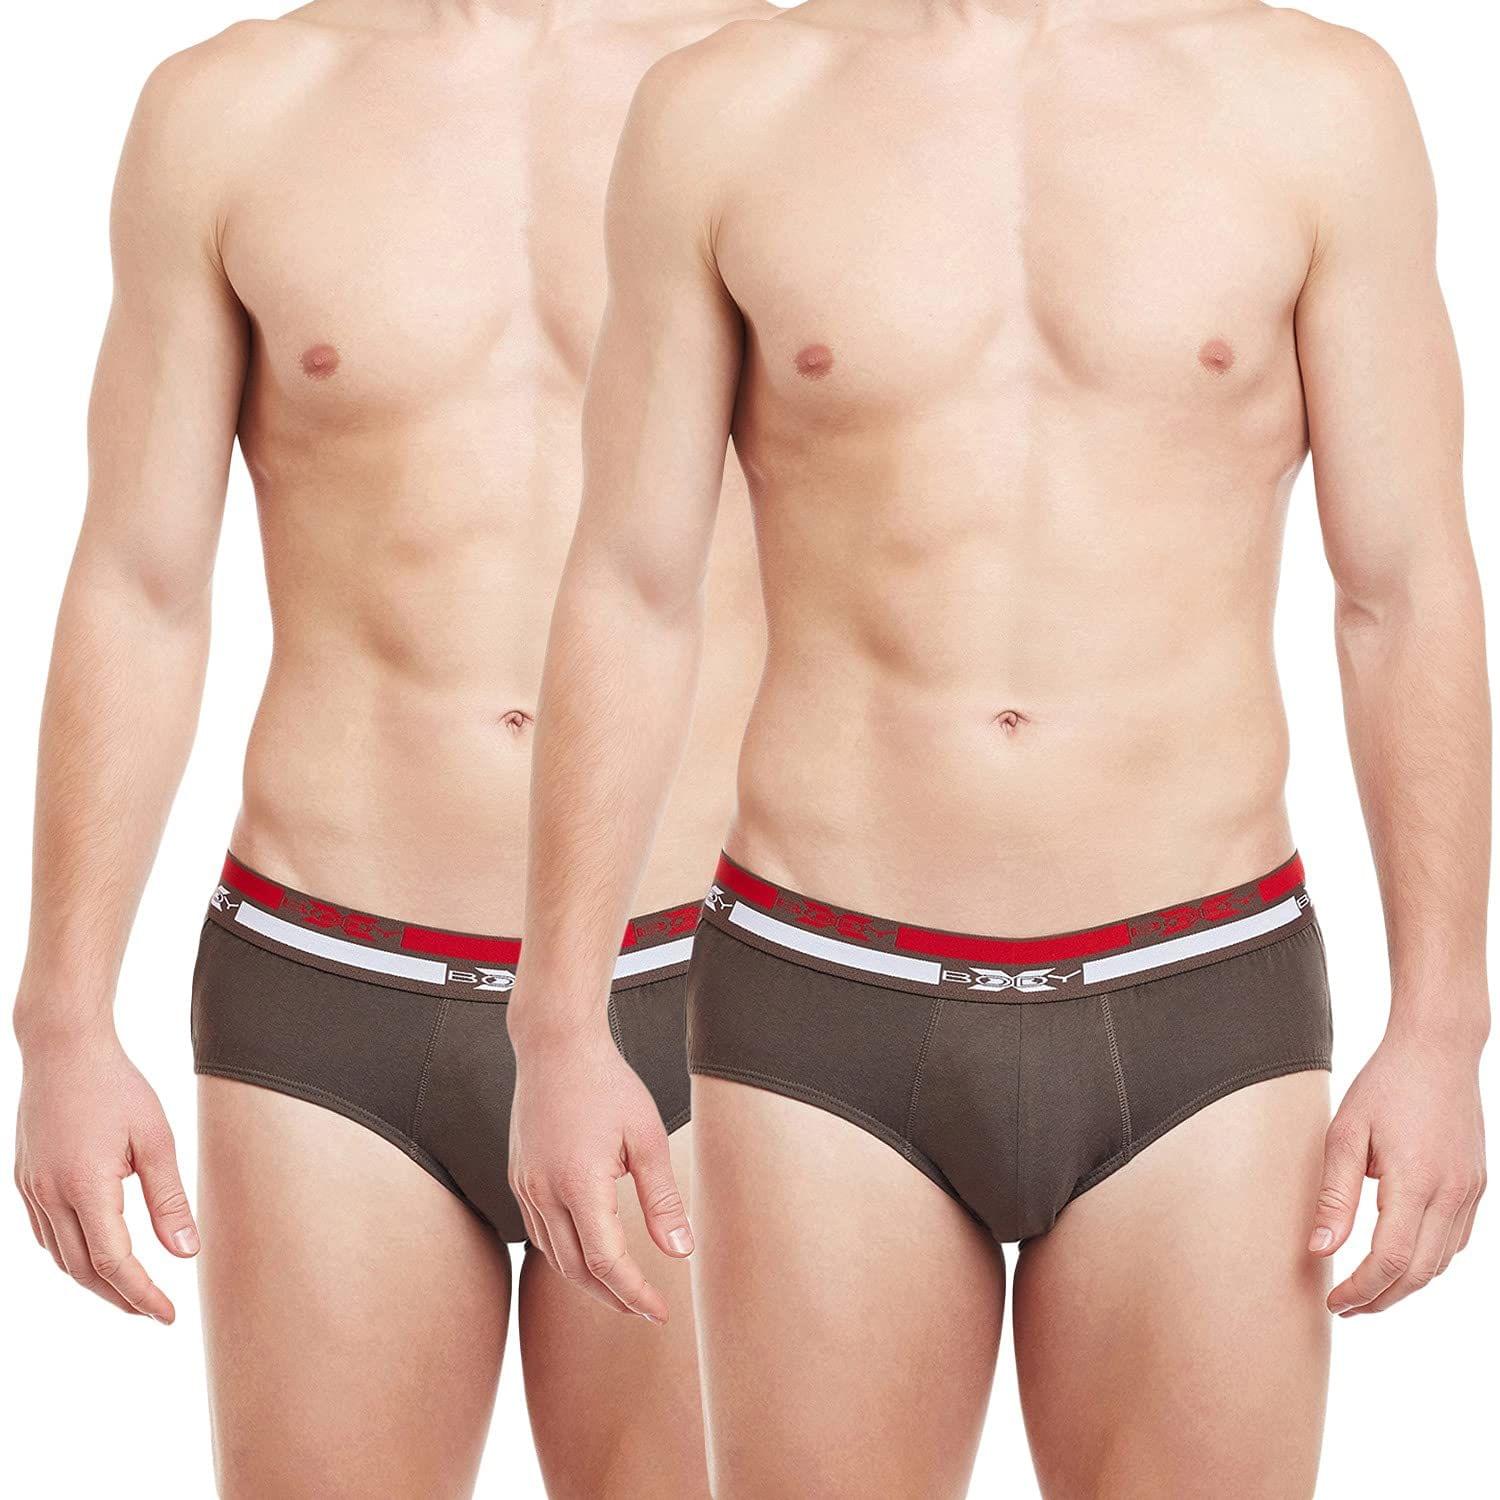 BodyX Men's Solid Briefs (Pack of 2) by Bodycare